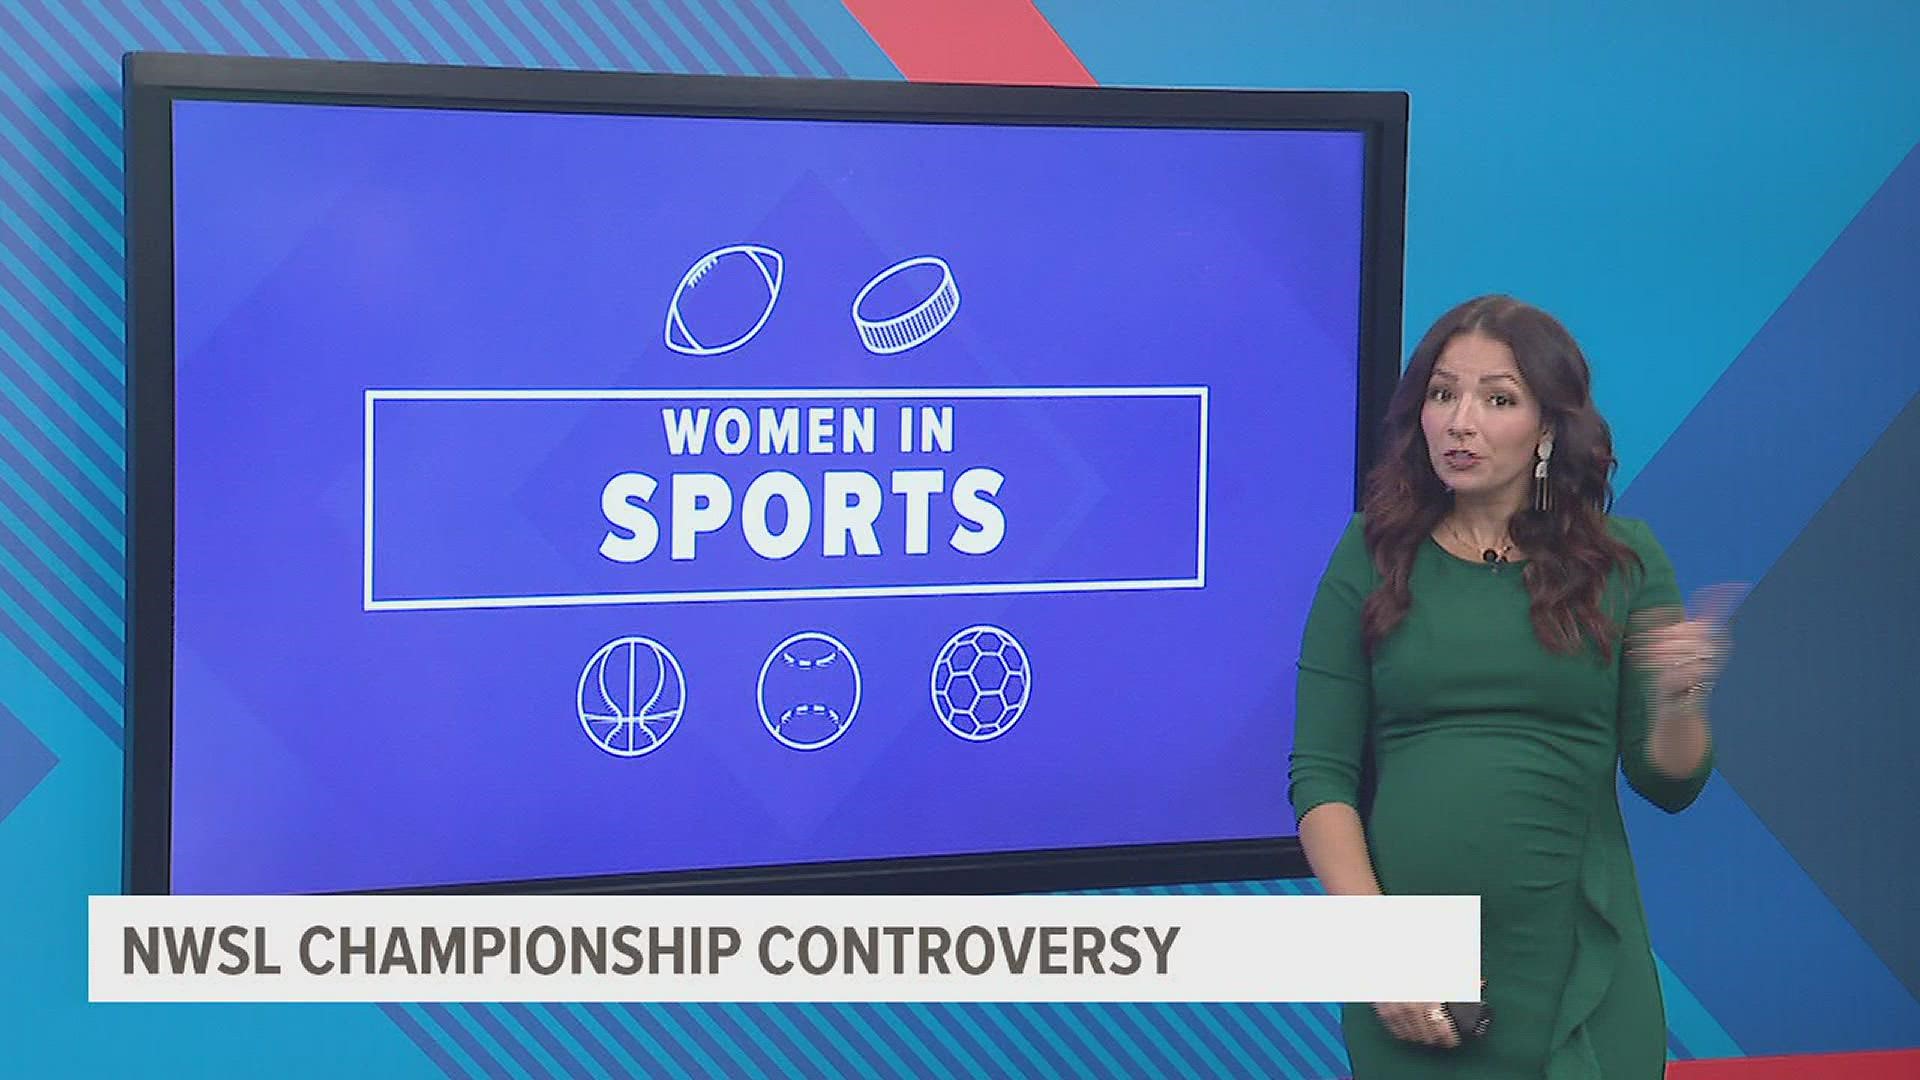 The NWSL announced the schedule for the Championship game and players are less than thrilled. Emily Proud from WKRN in Nashville joins us to discuss the controversy.